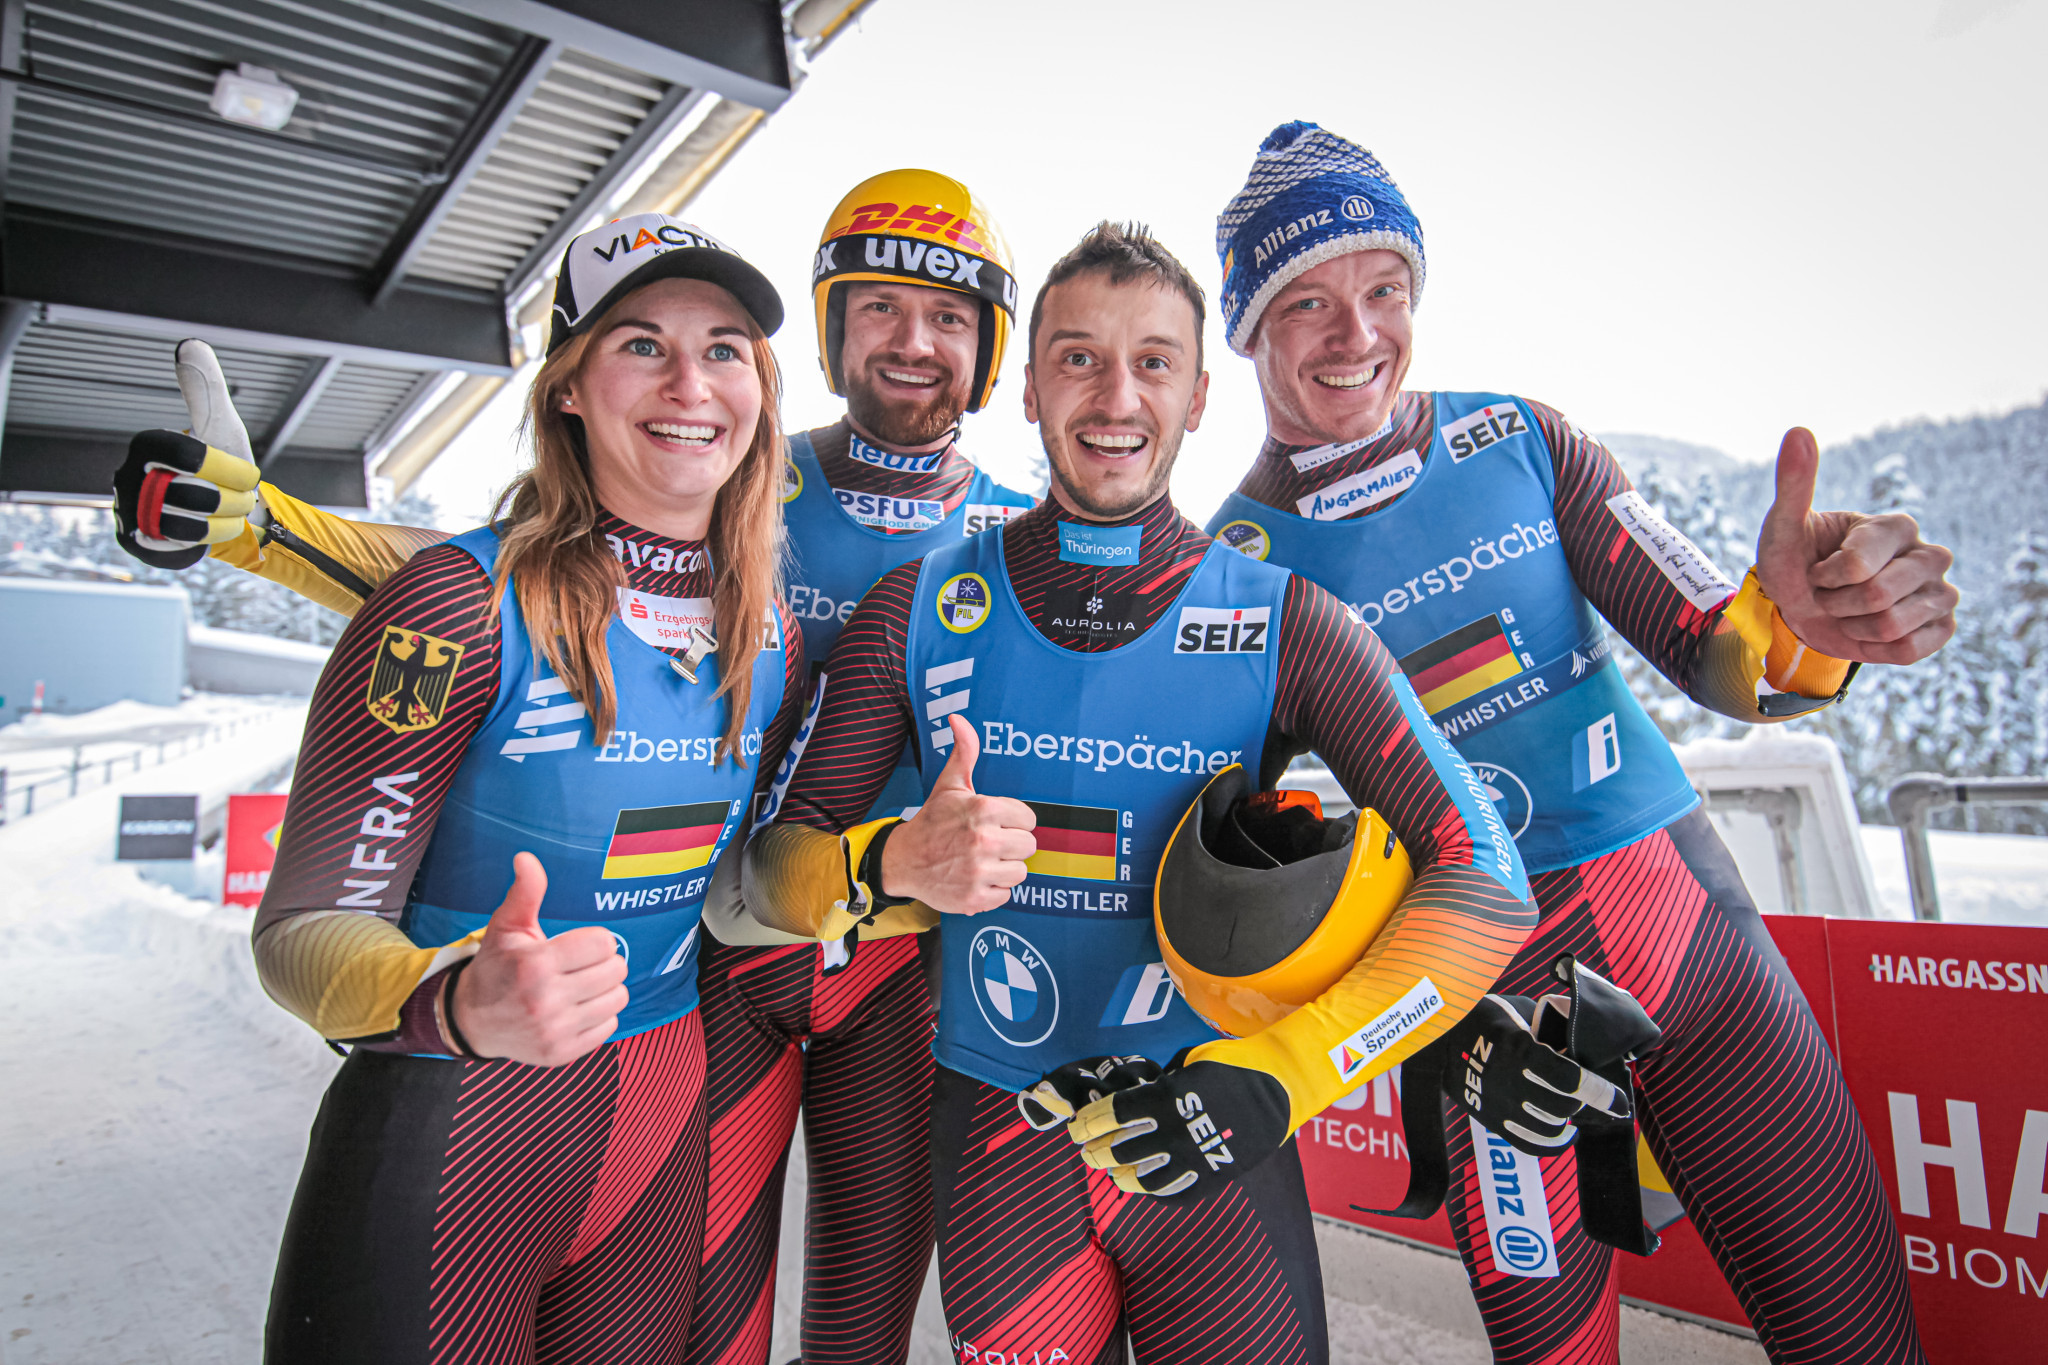 Germany claimed the team relay and doubles gold at the FIL World Cup in Whistler ©FIL